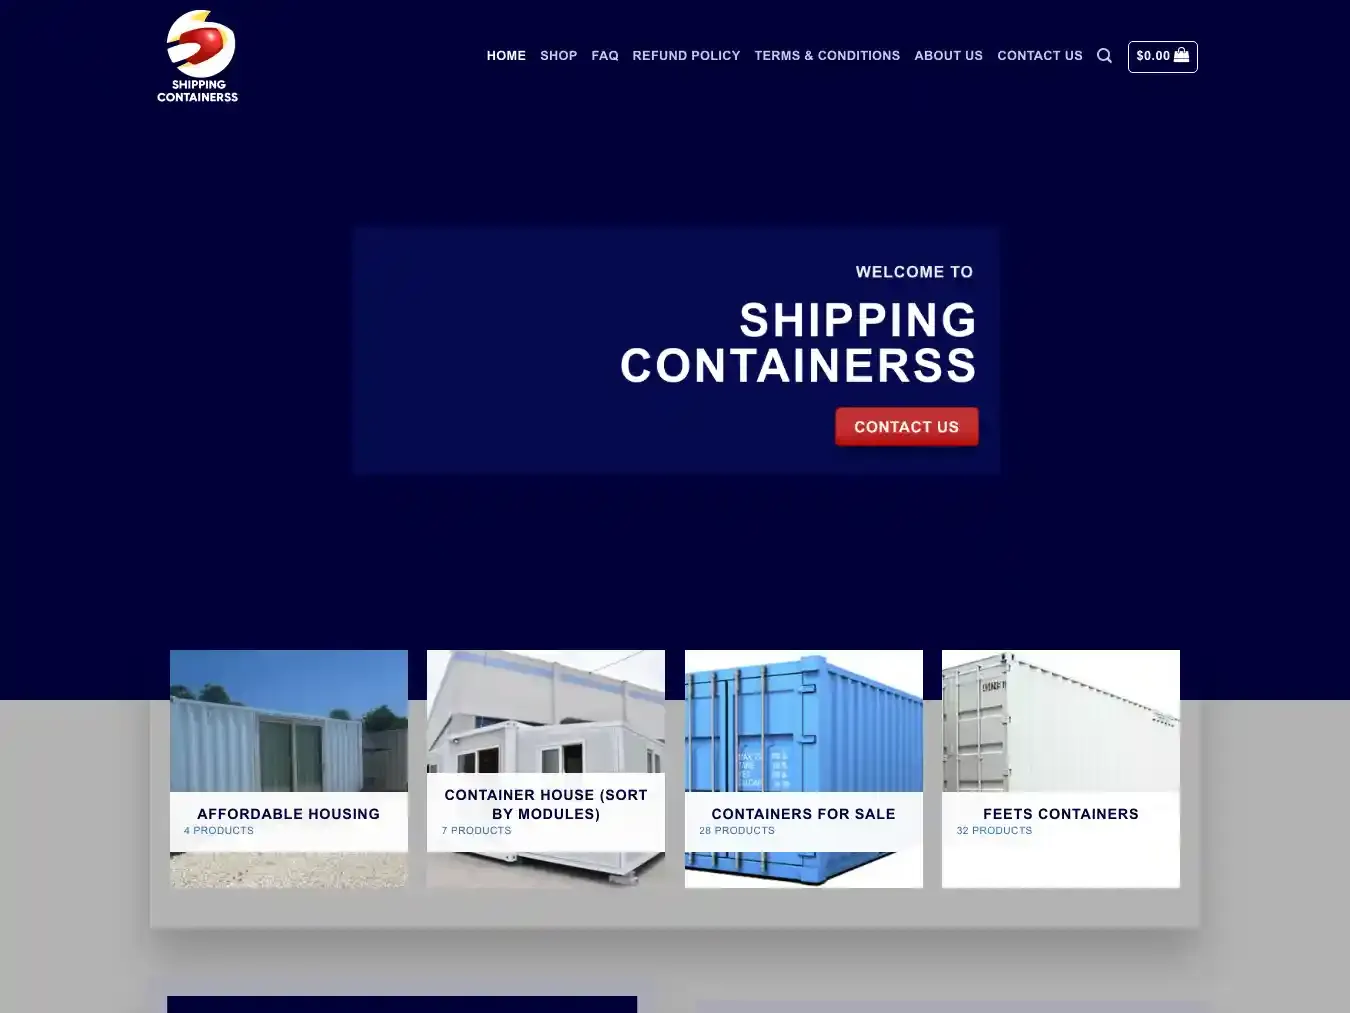 Shippingcontainerss.com Fraudulent Container website.